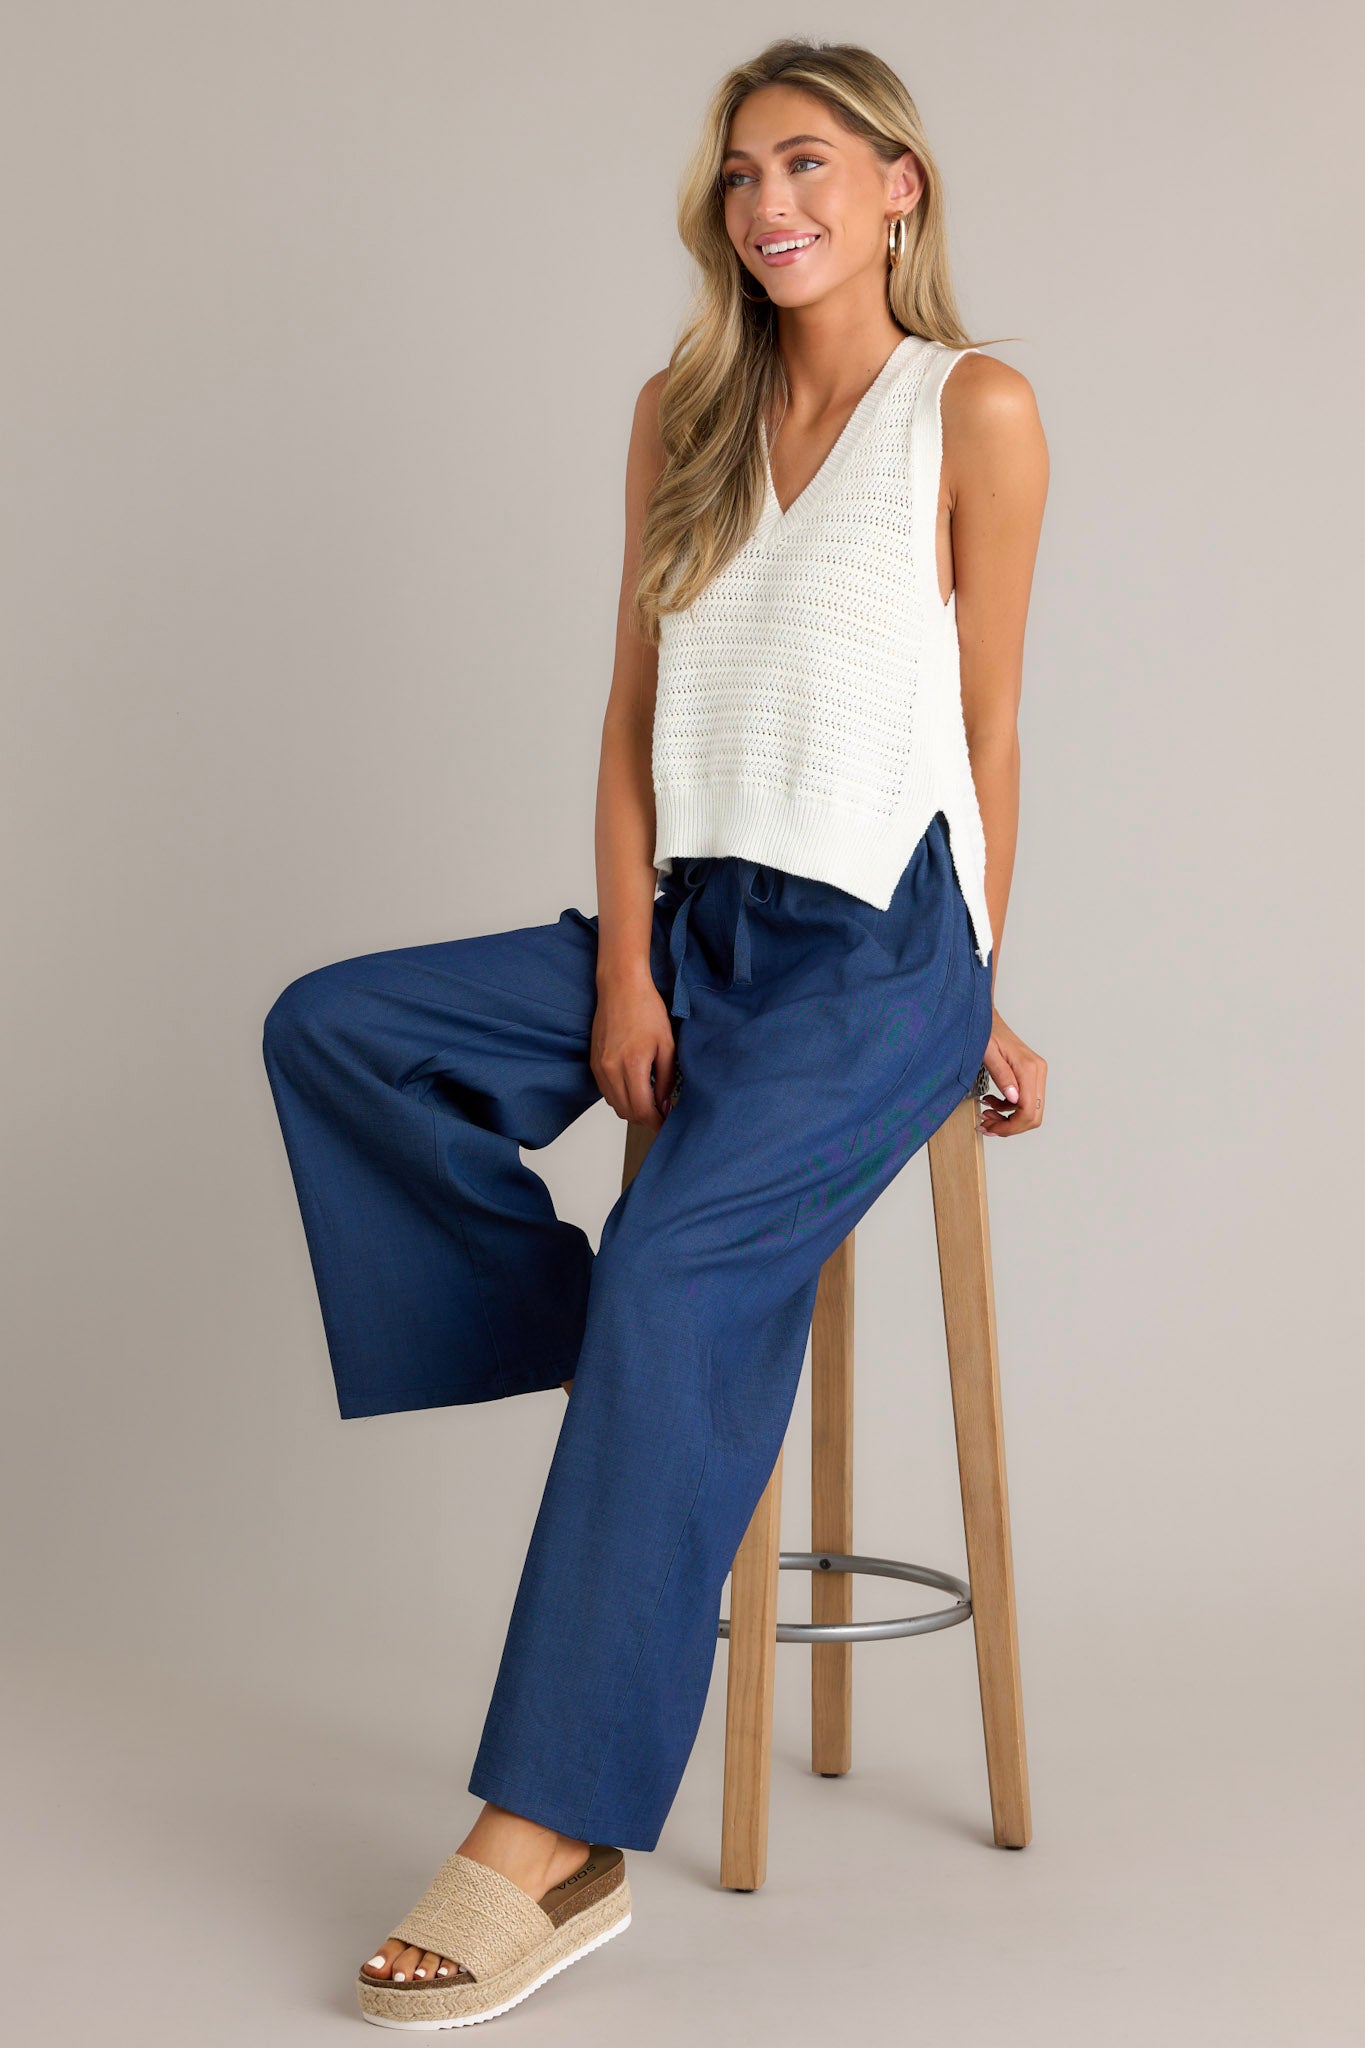 These dark chambray pants feature a high waisted design, an elastic waistband, a self-tie drawstring, functional hip pockets, and a wide leg.